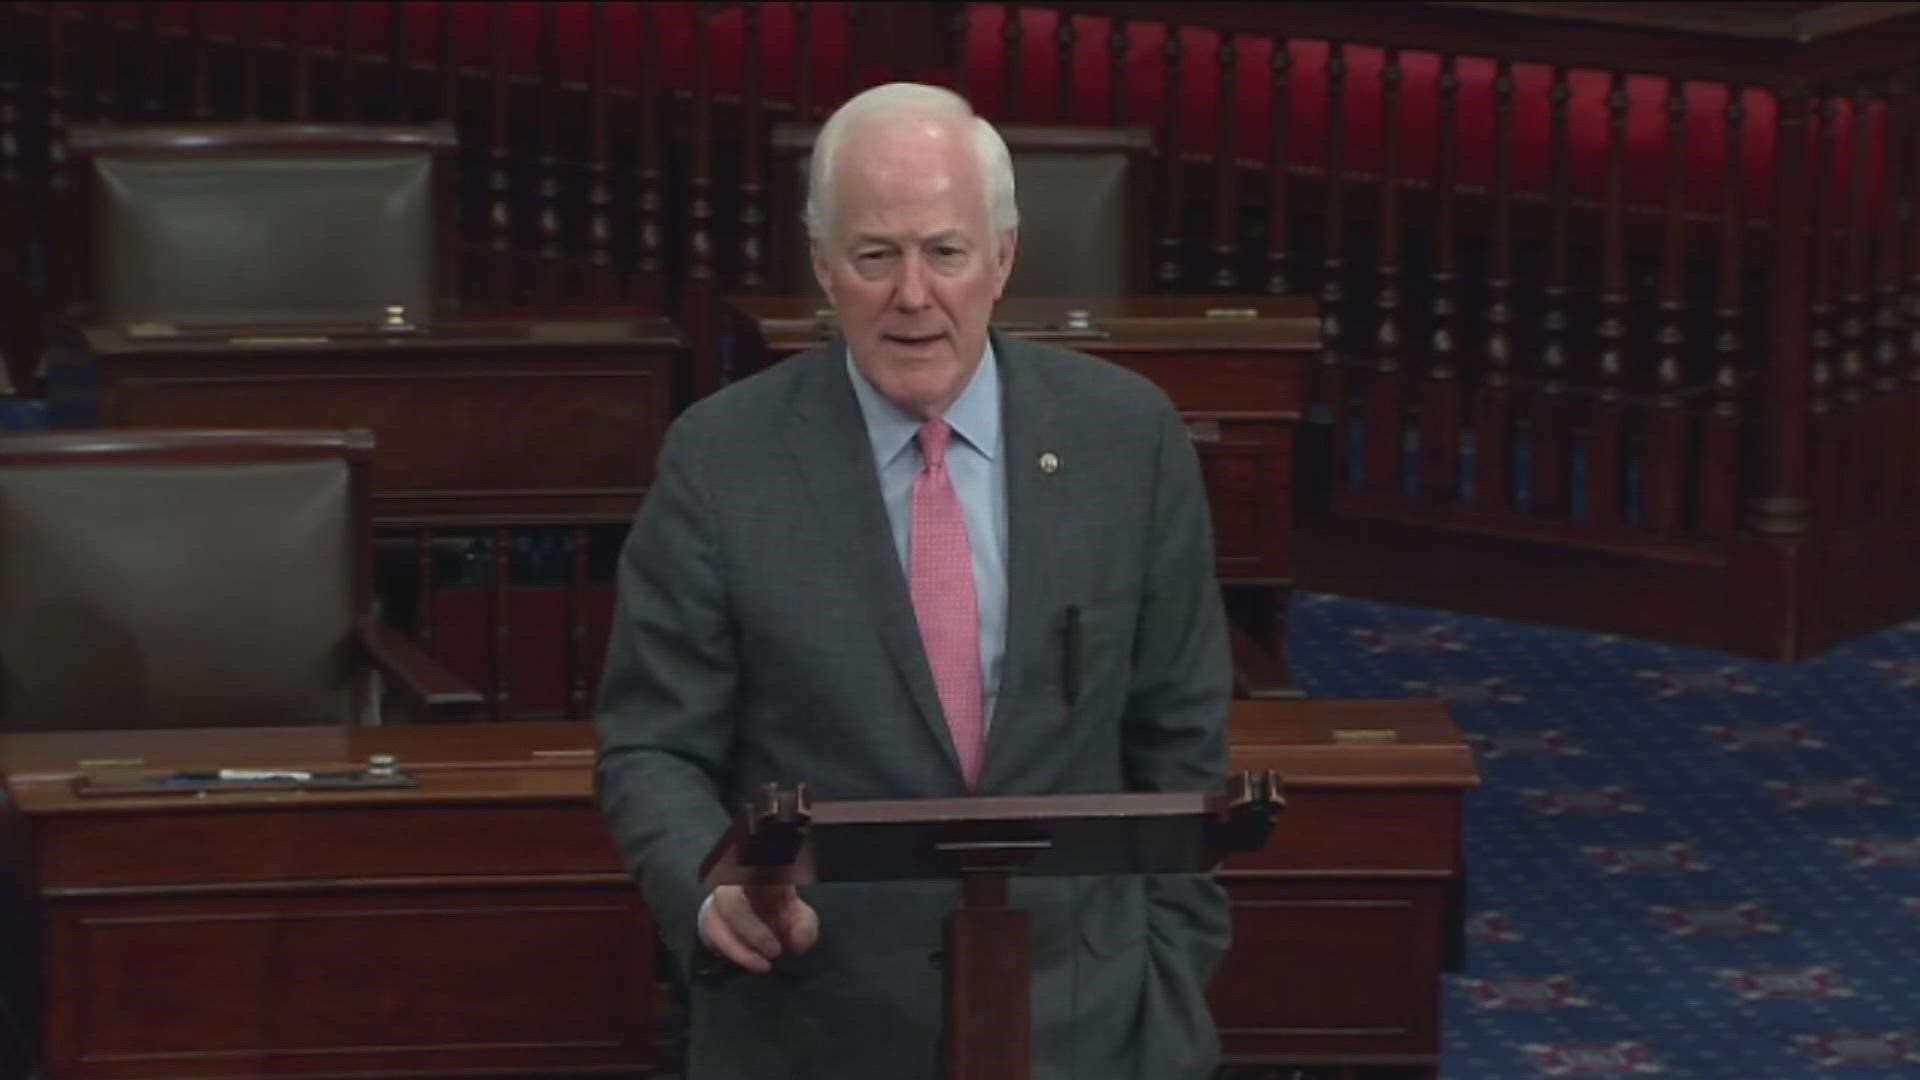 U.S. Sen. John Cornyn says federal lawmakers are considering legislation aimed at keeping guns out of the hands of people who are not allowed to have them.